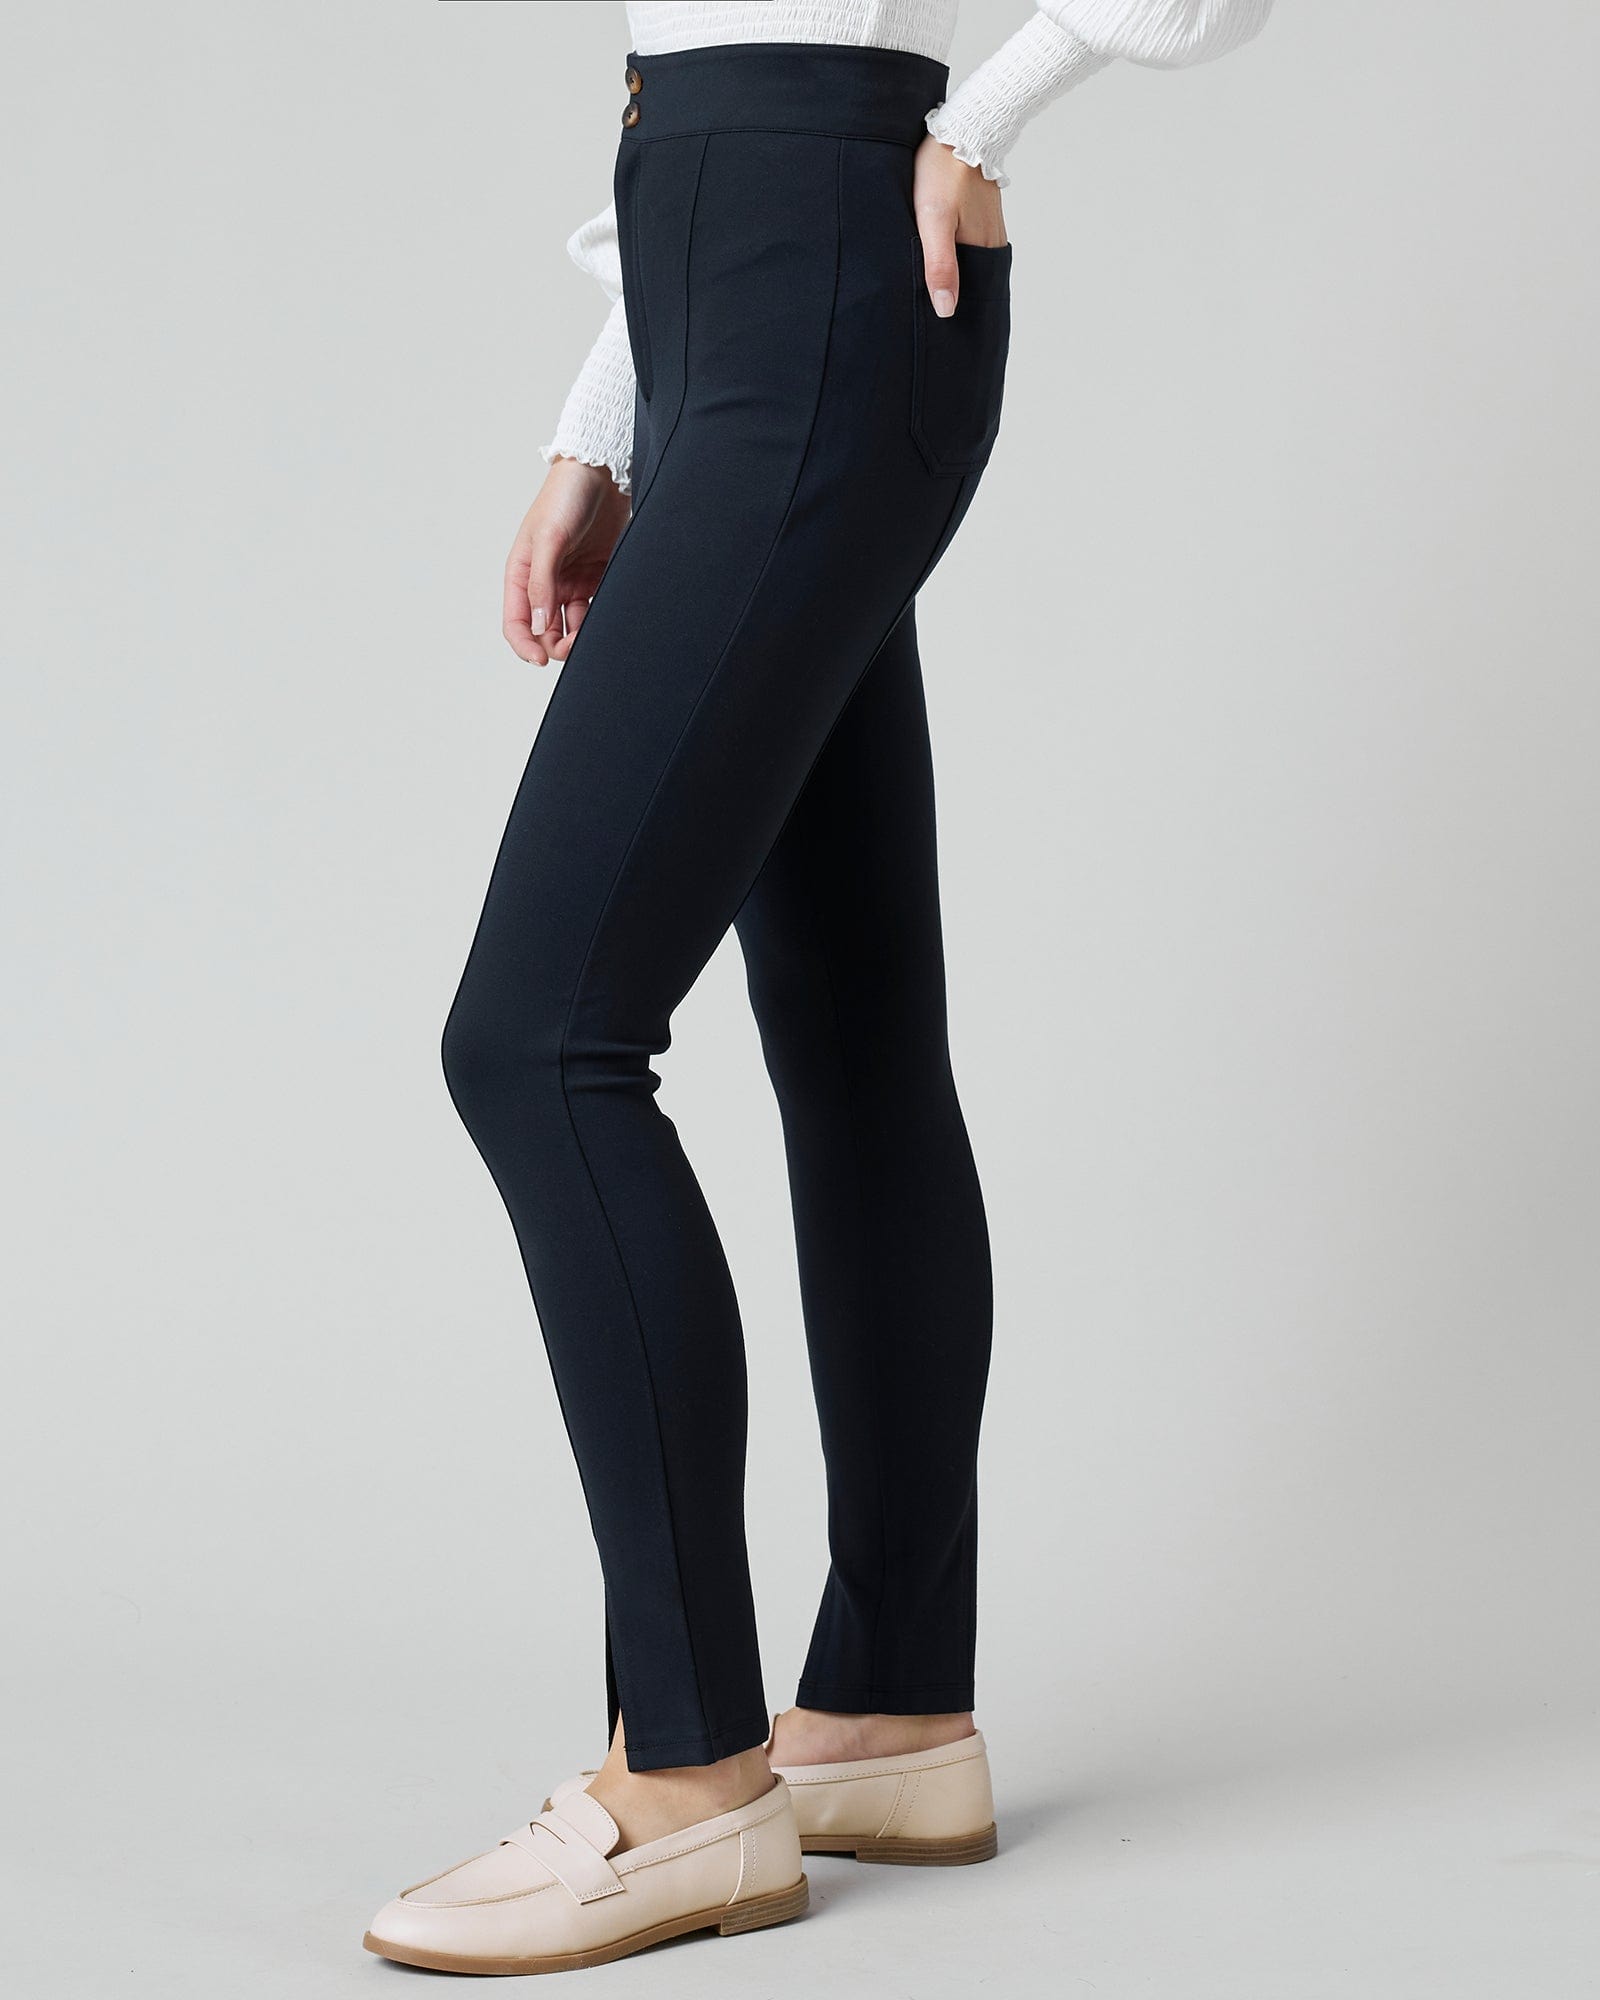 Woman in black fitted pants